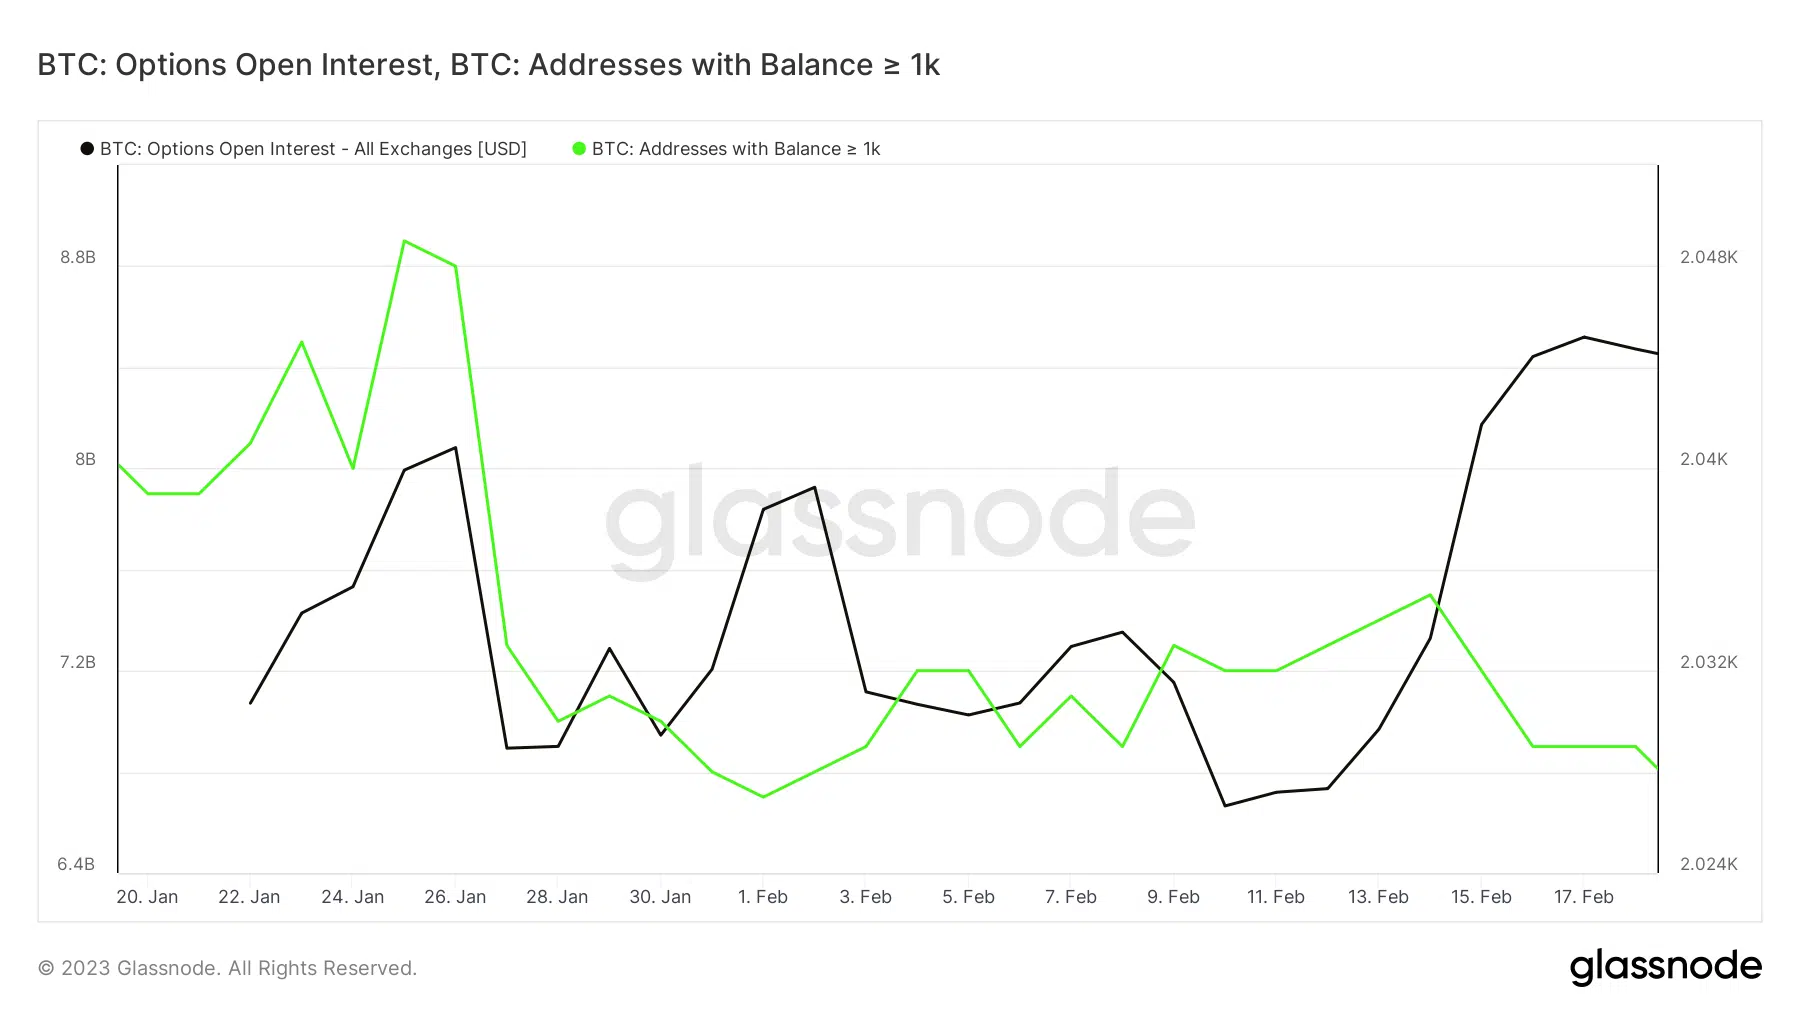 Bitcoin options open interest and addresses with balances over 1000 BTC